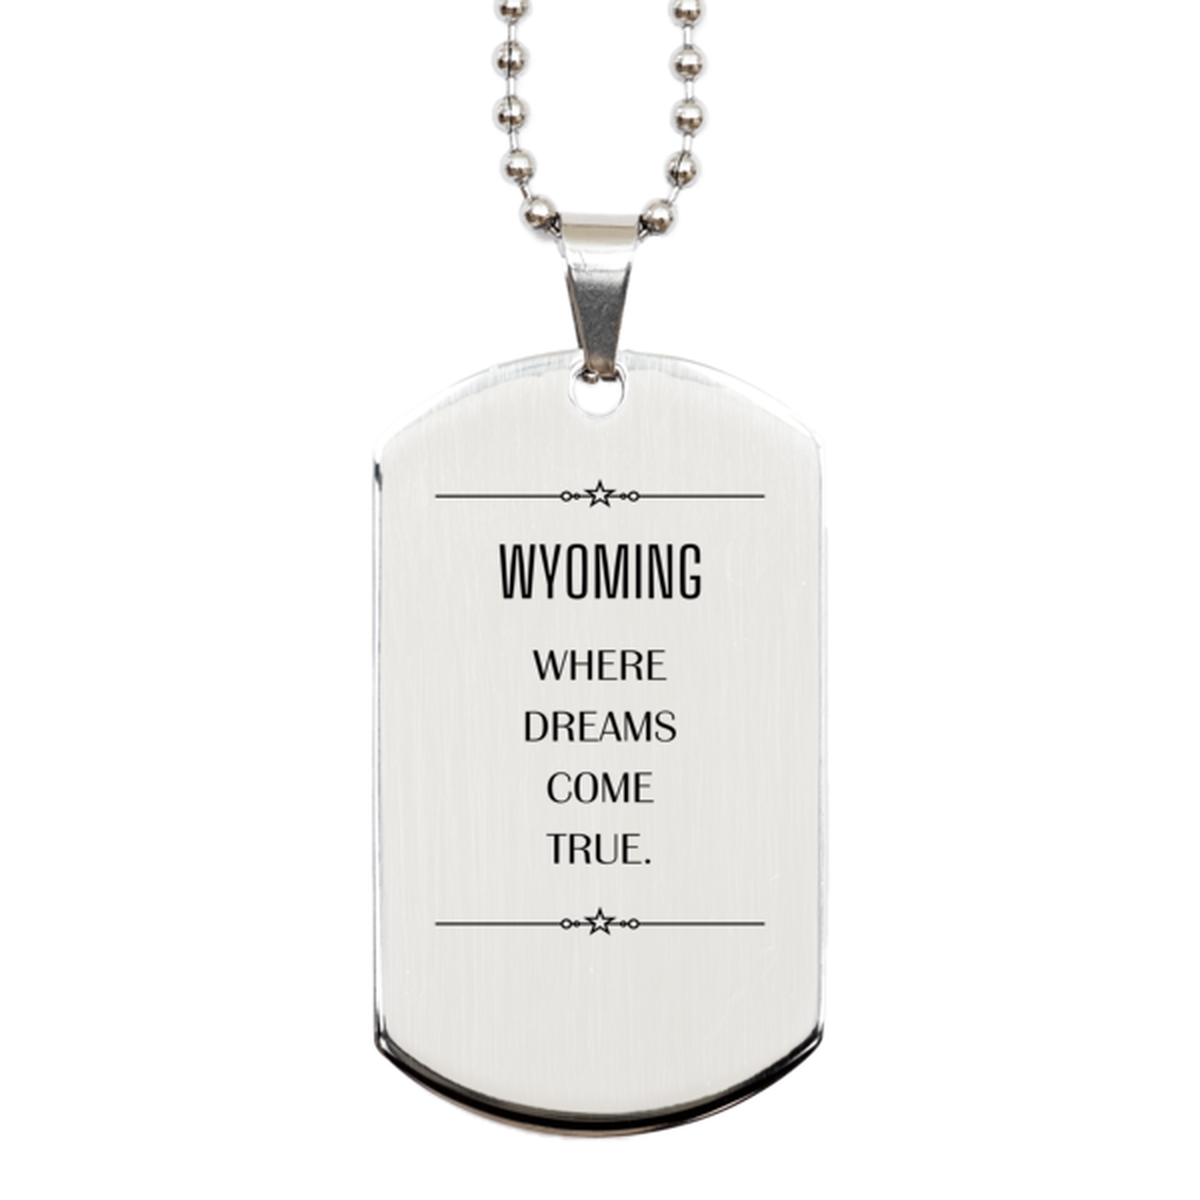 Love Wyoming State Silver Dog Tag, Wyoming Where dreams come true, Birthday Inspirational Gifts For Wyoming Men, Women, Friends